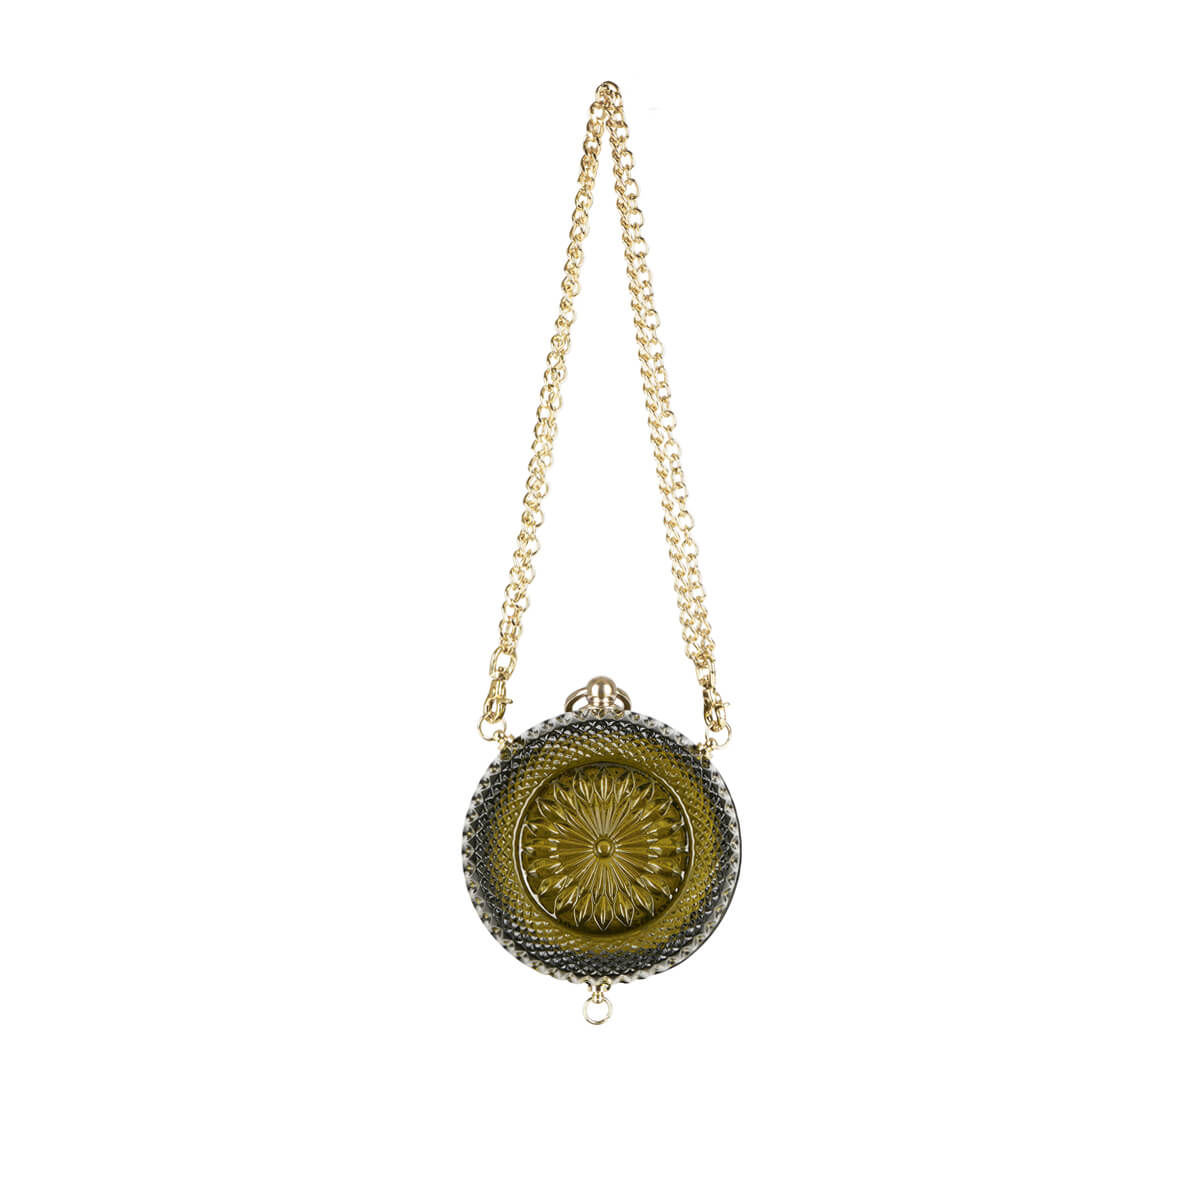 NEW IN Sphere Clutch Olive